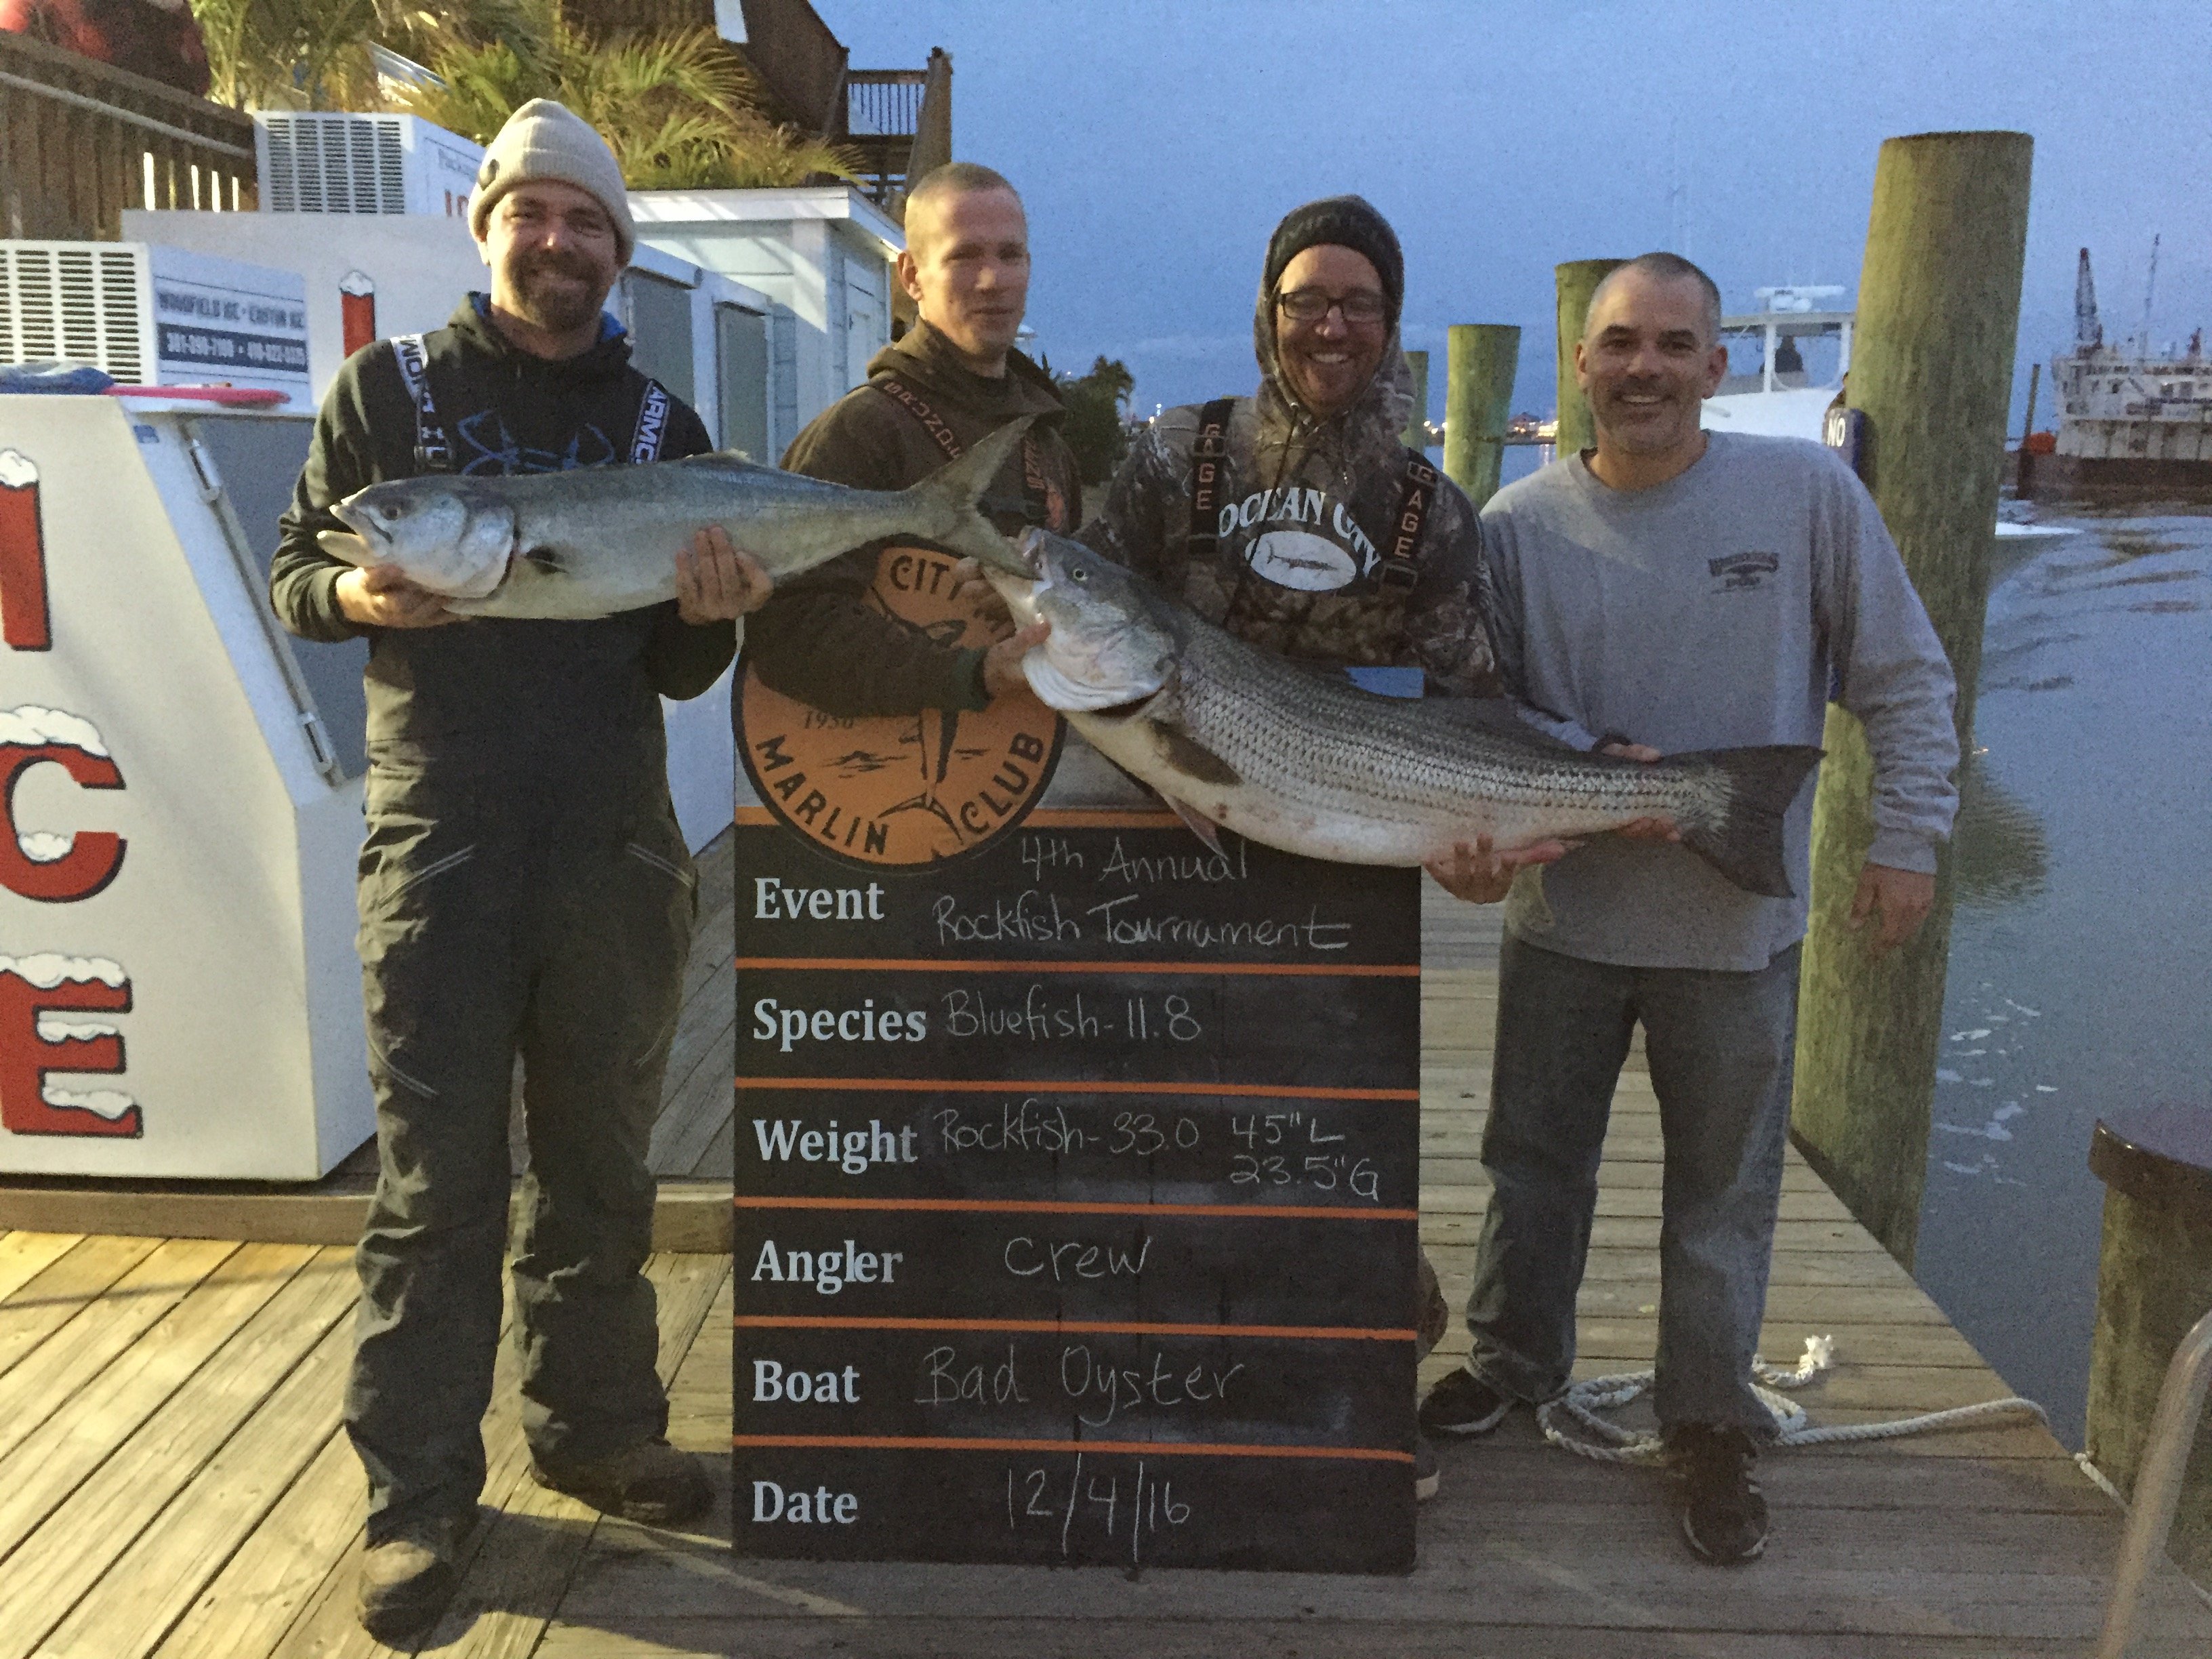 Bad Oyster Wins 4th Annual OCMC Rockfish Tournament